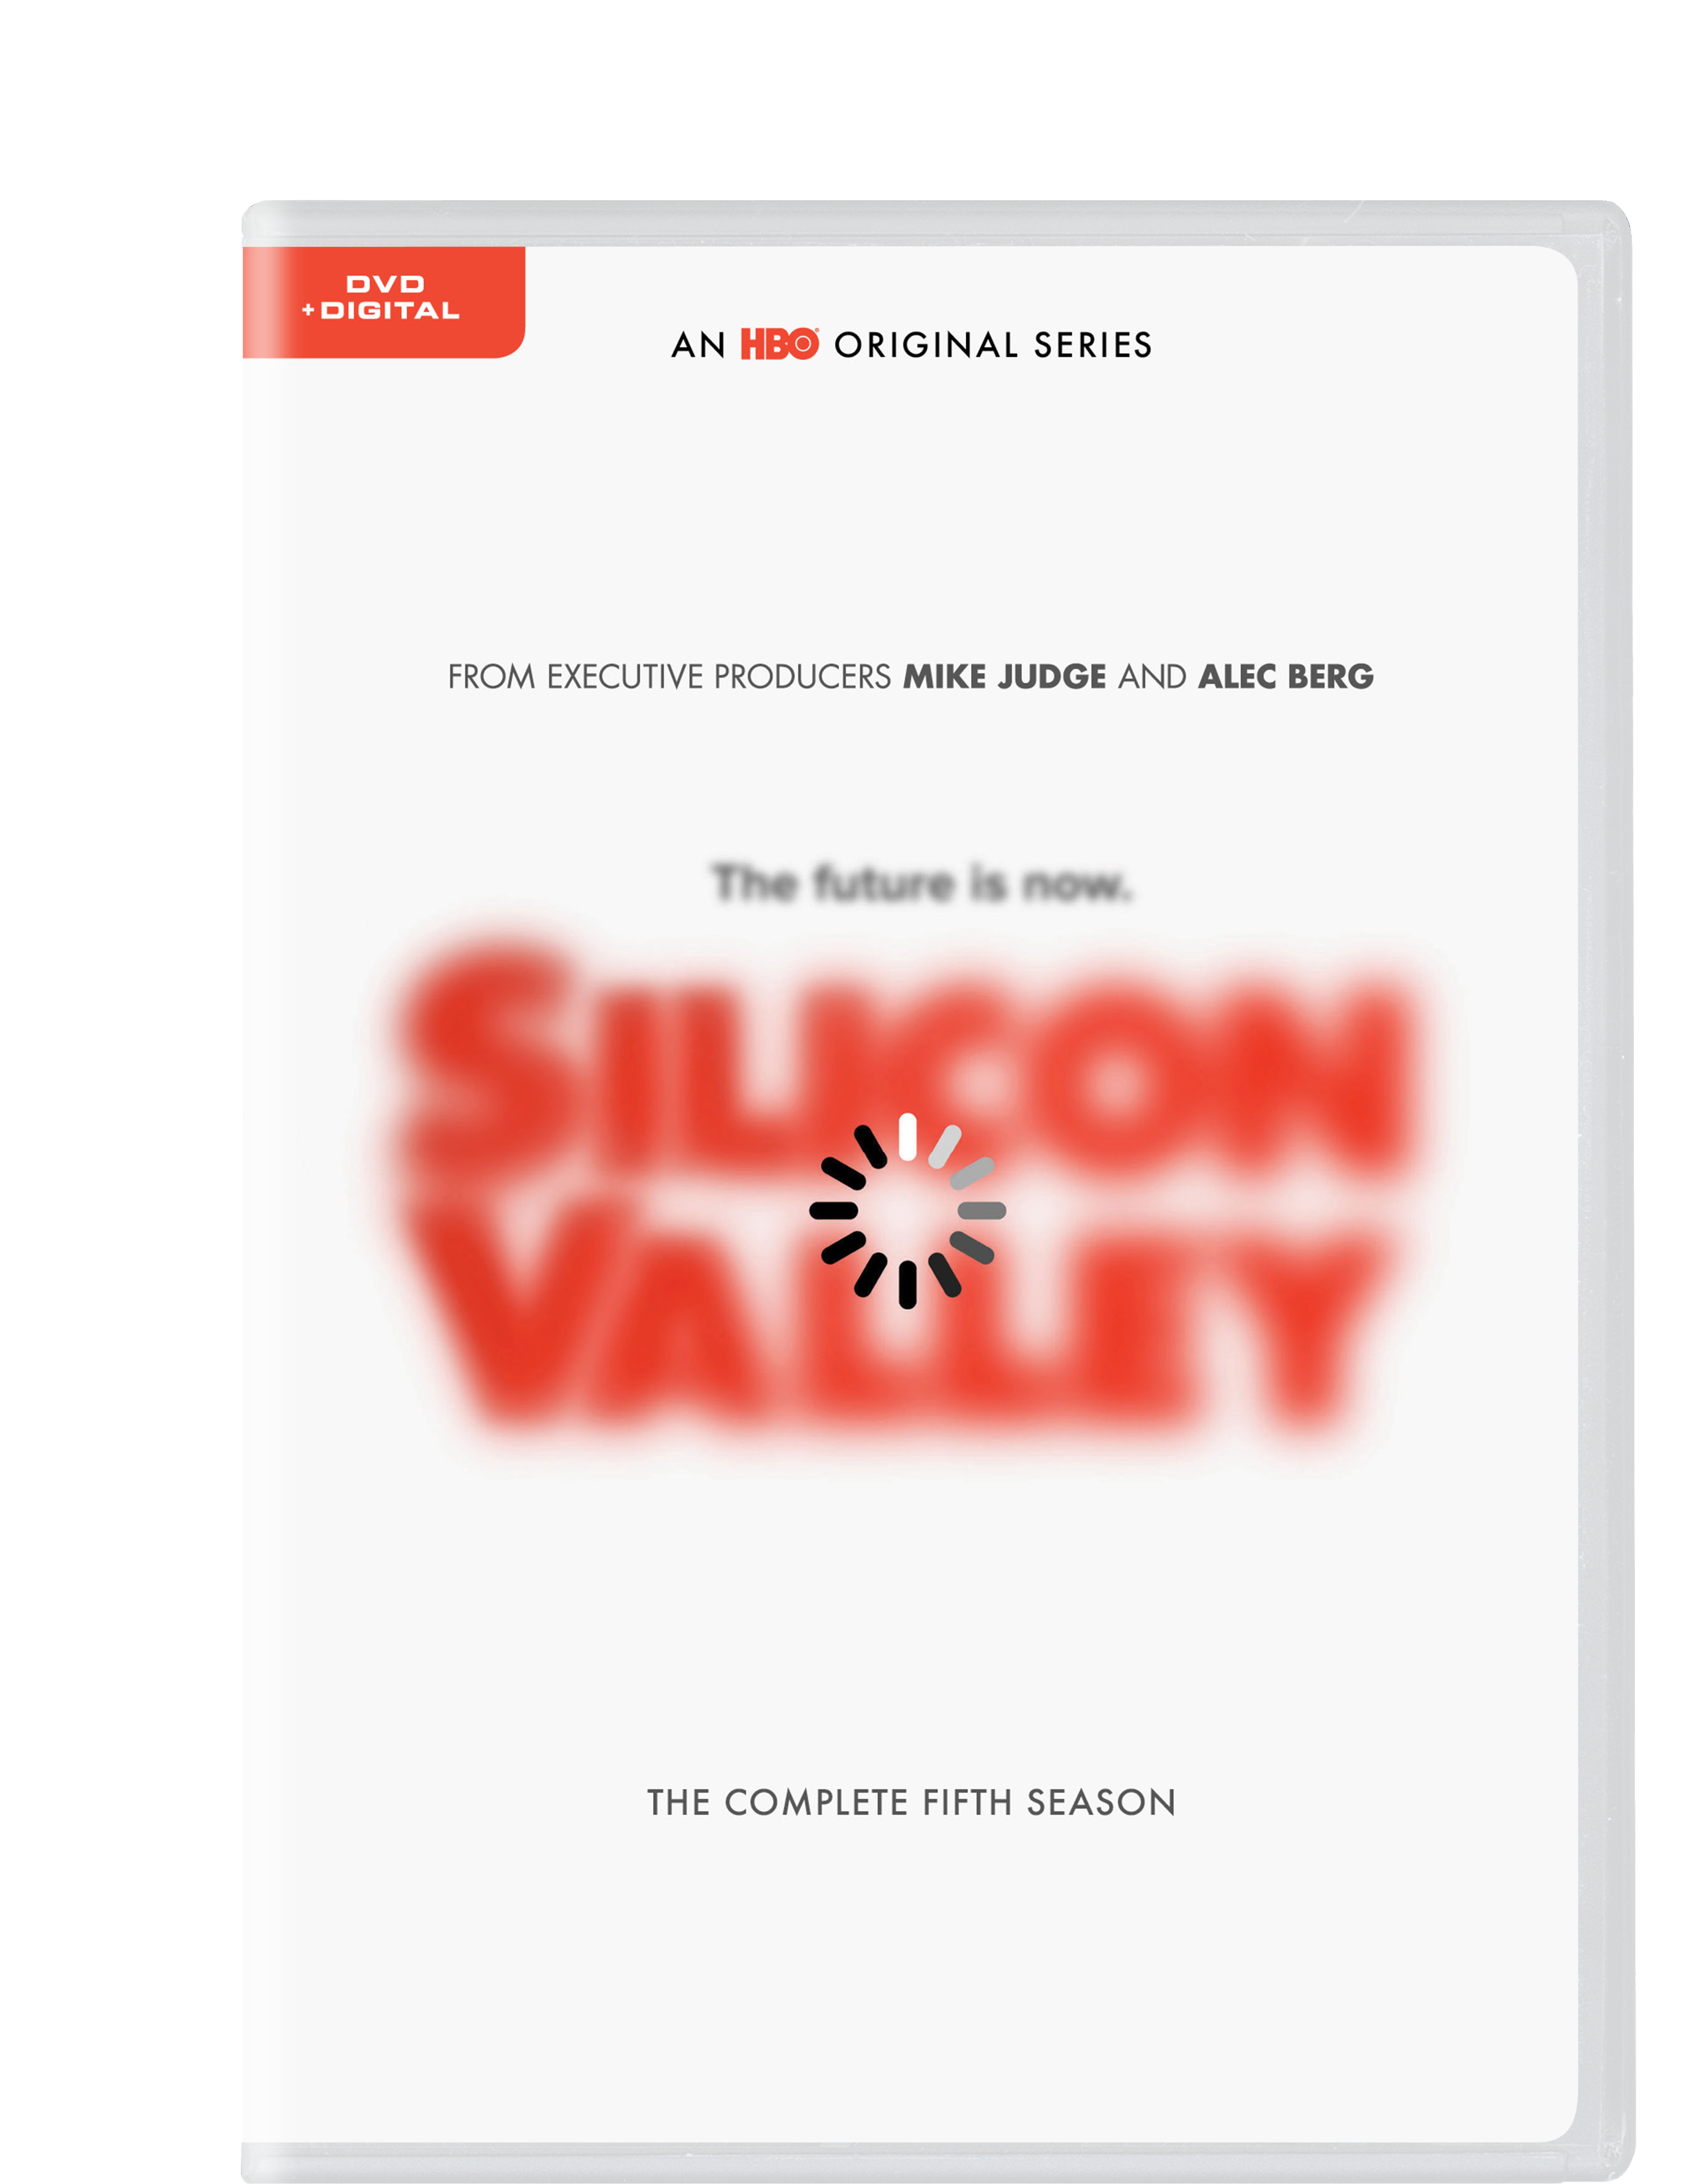 Silicon Valley: The Complete Fifth Season DVD cover (HBO)